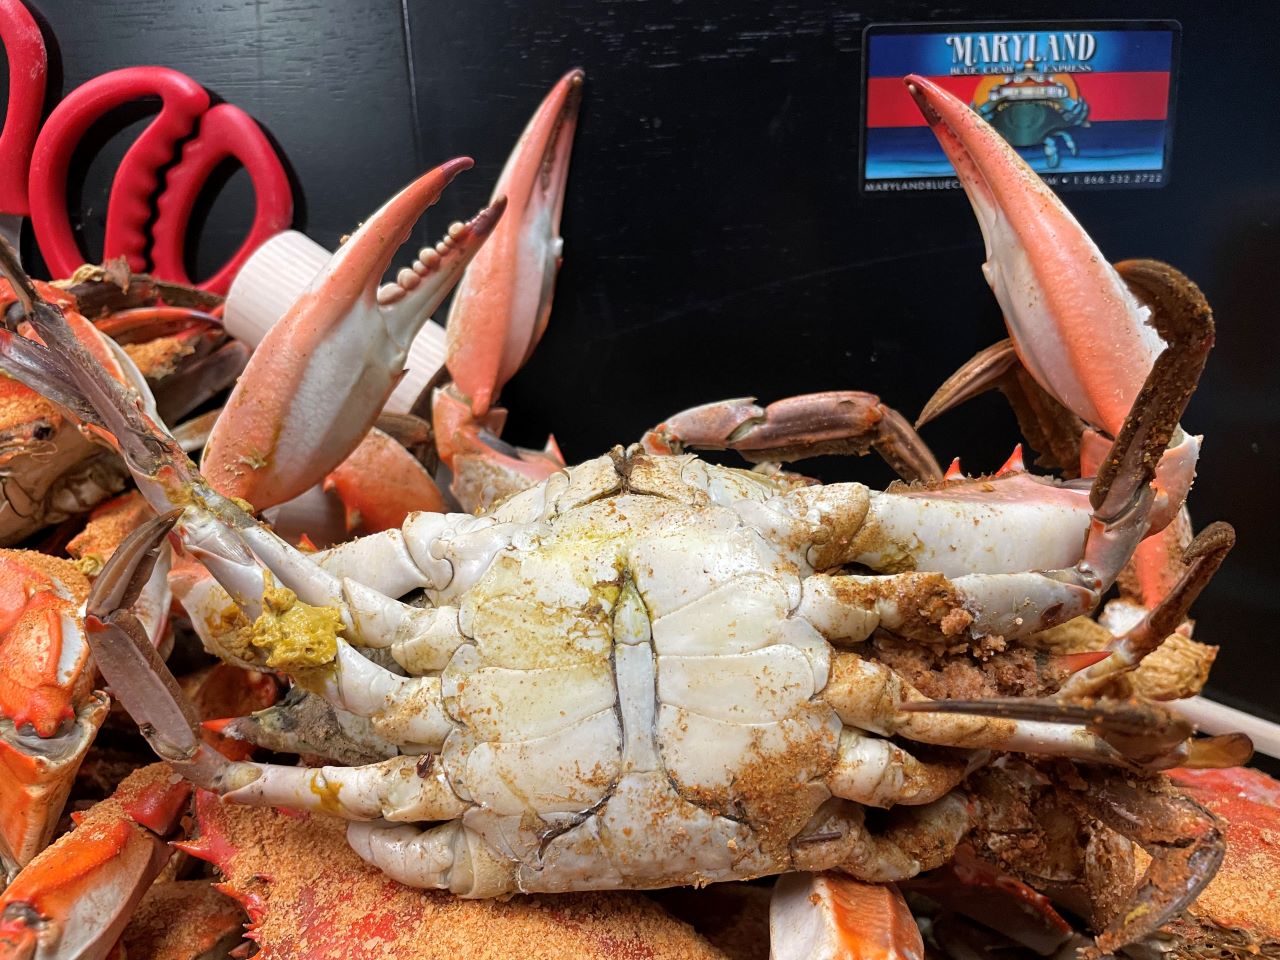 Blue Crab Steamed & LIVE Dozens :: Behemoth Super Dozen Steamed Blue Crabs,  7”- Plus & (2) Crab Mallets ~ A Miracle of Nature! - Maryland Crabs,  Maryland Blue Crab, Soft Shell